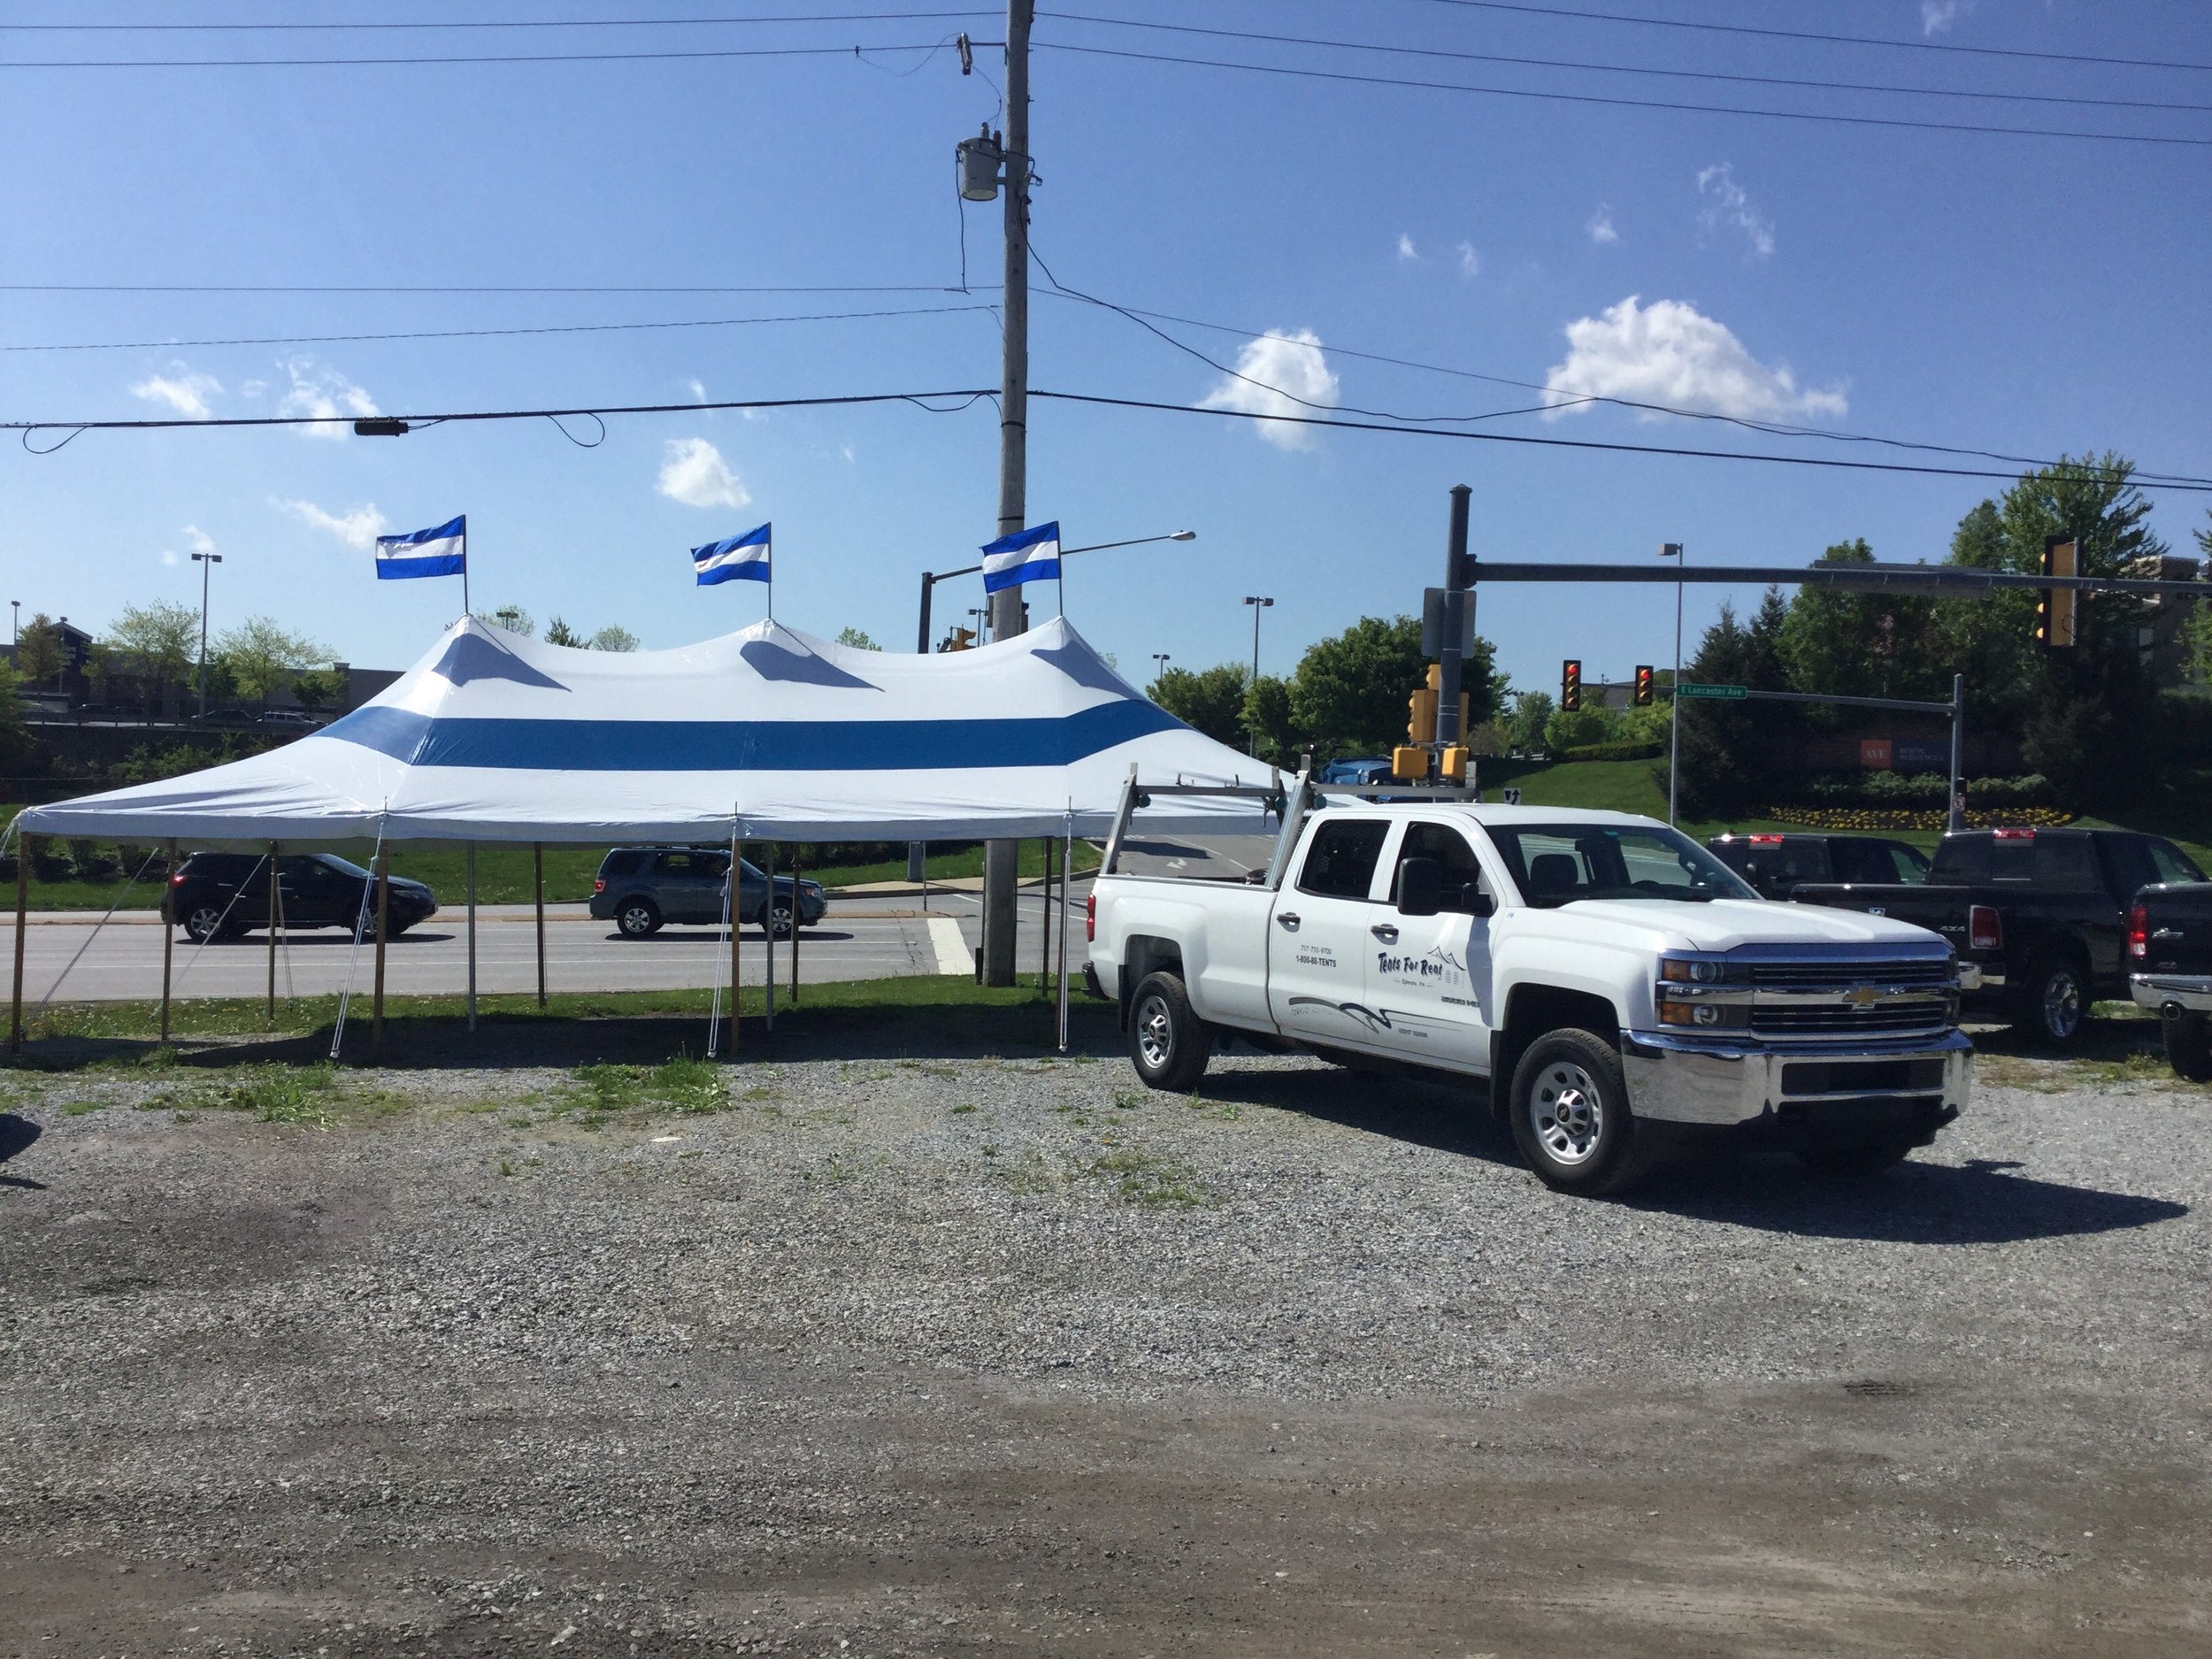 20x40 blue and white striped colored tent